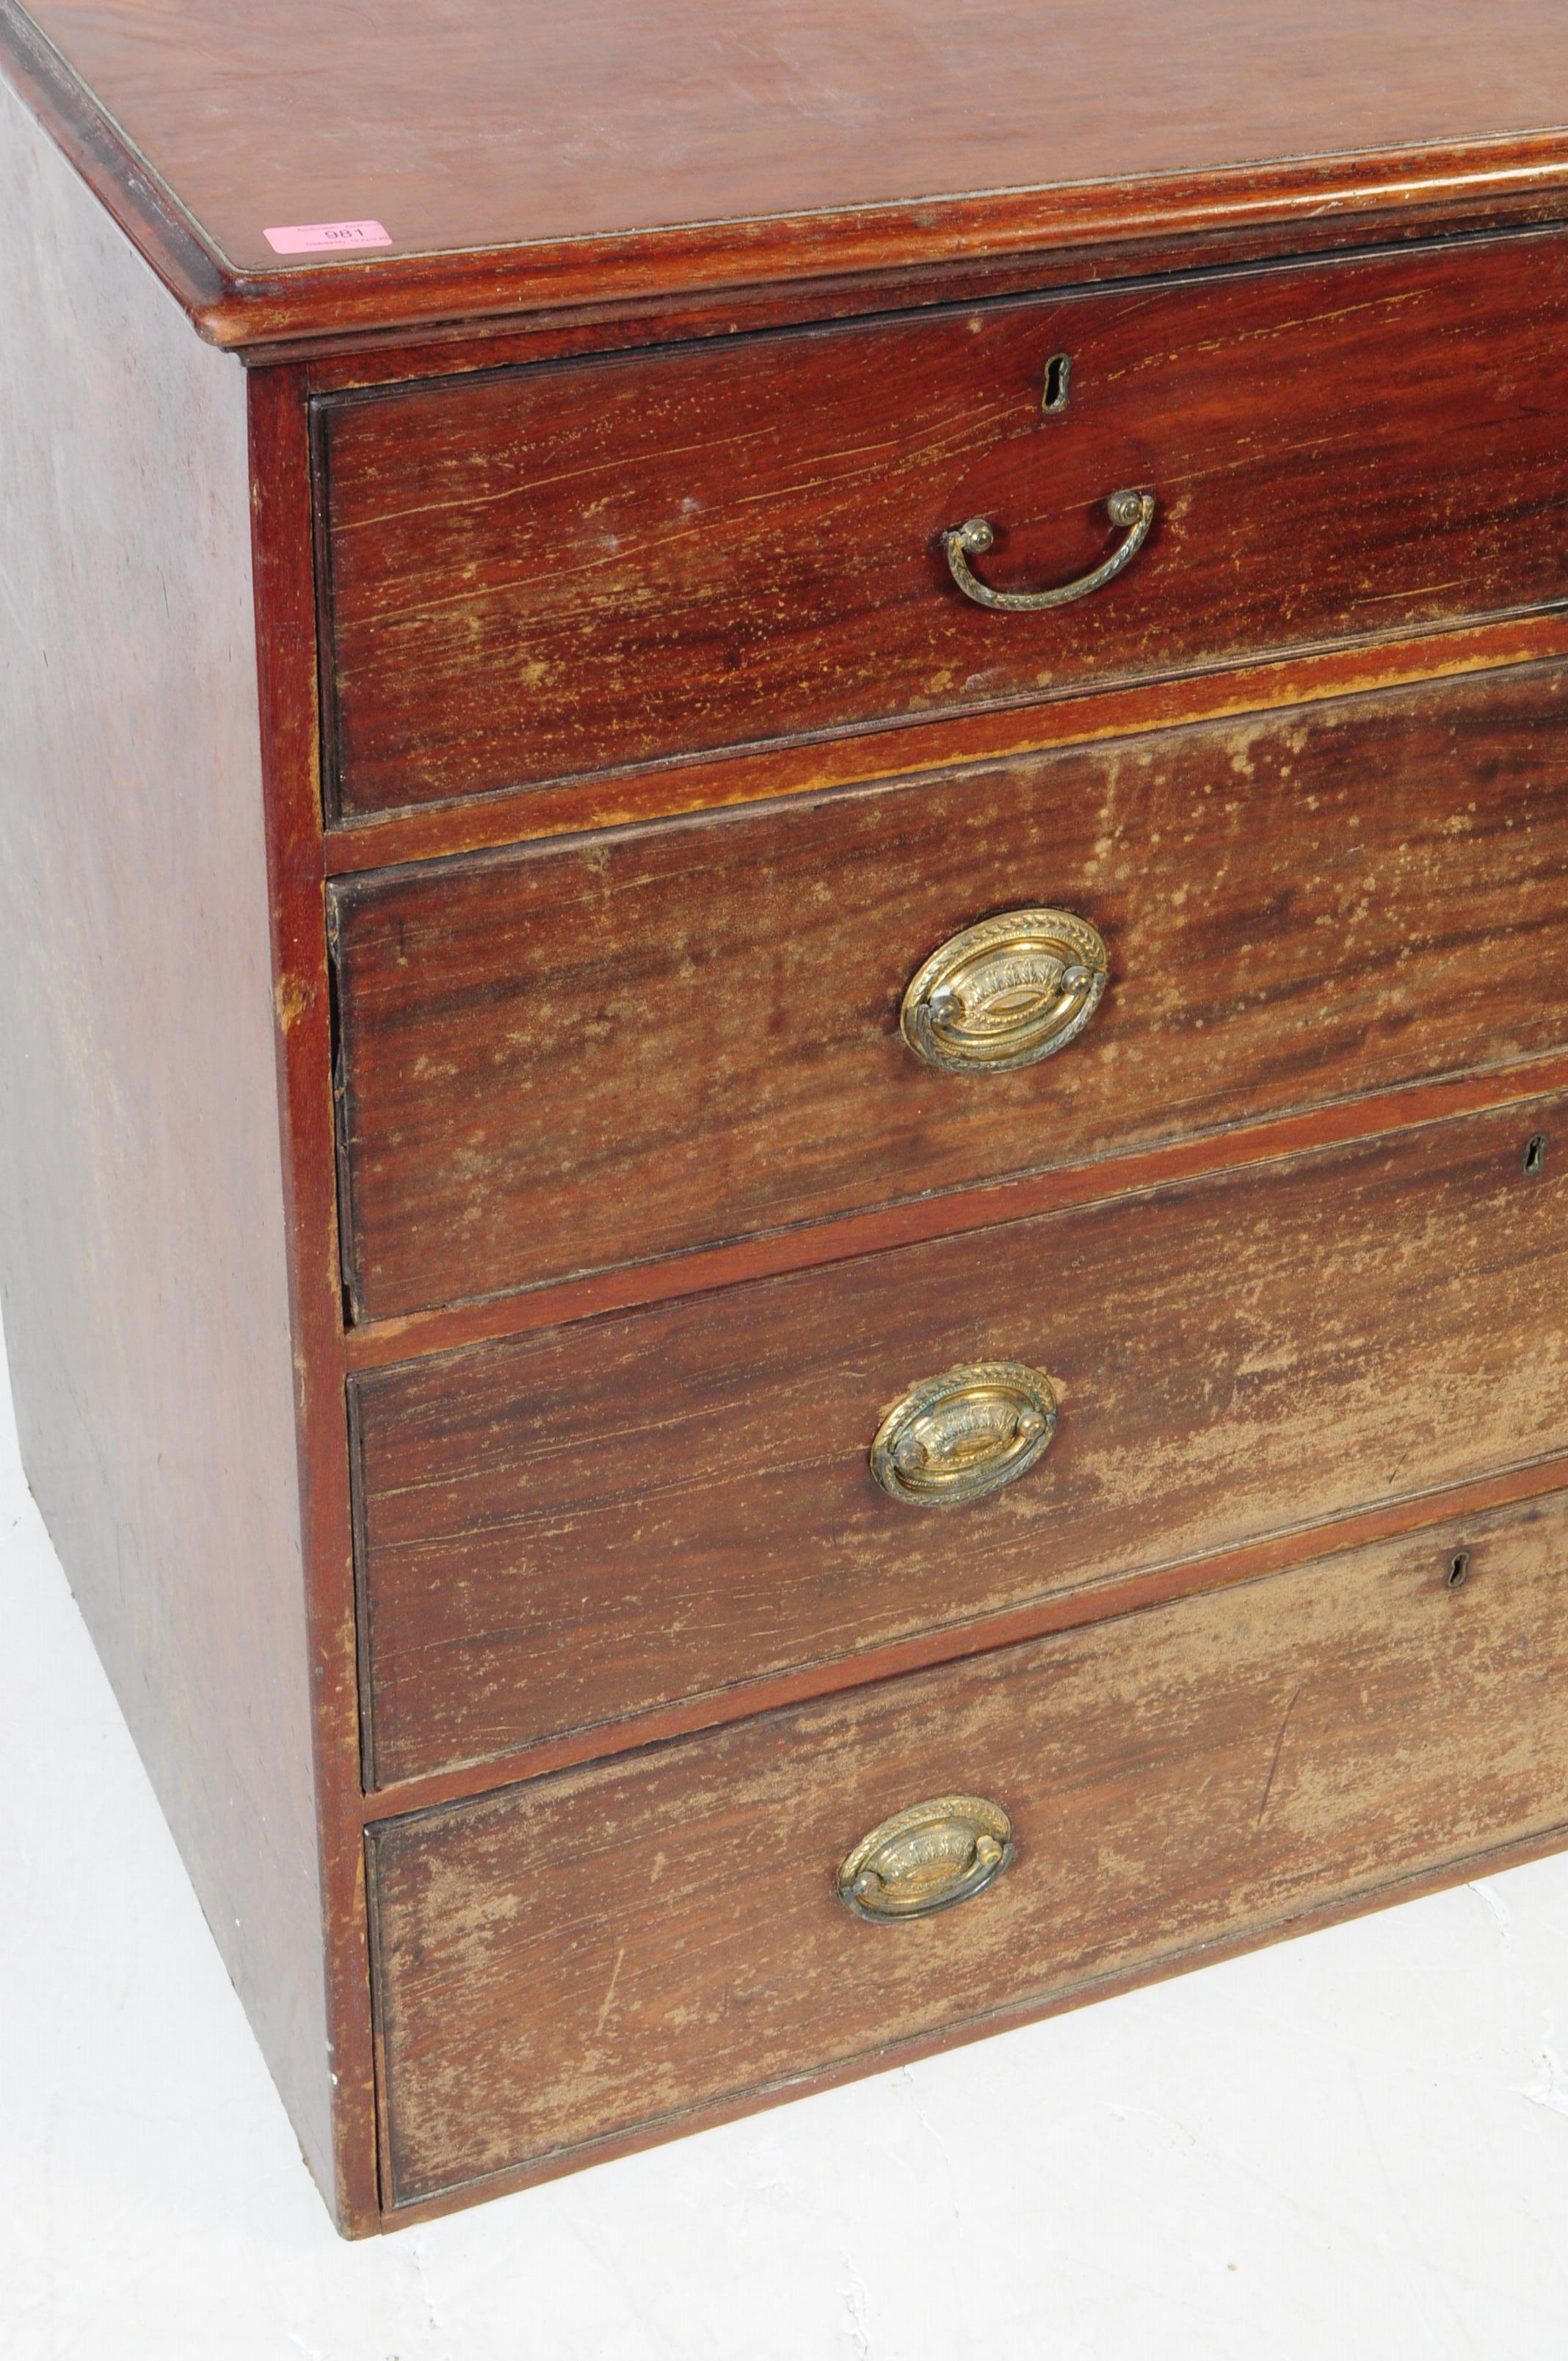 GEORGE III MAHOGANY CHEST OF DRAWERS - Image 2 of 8